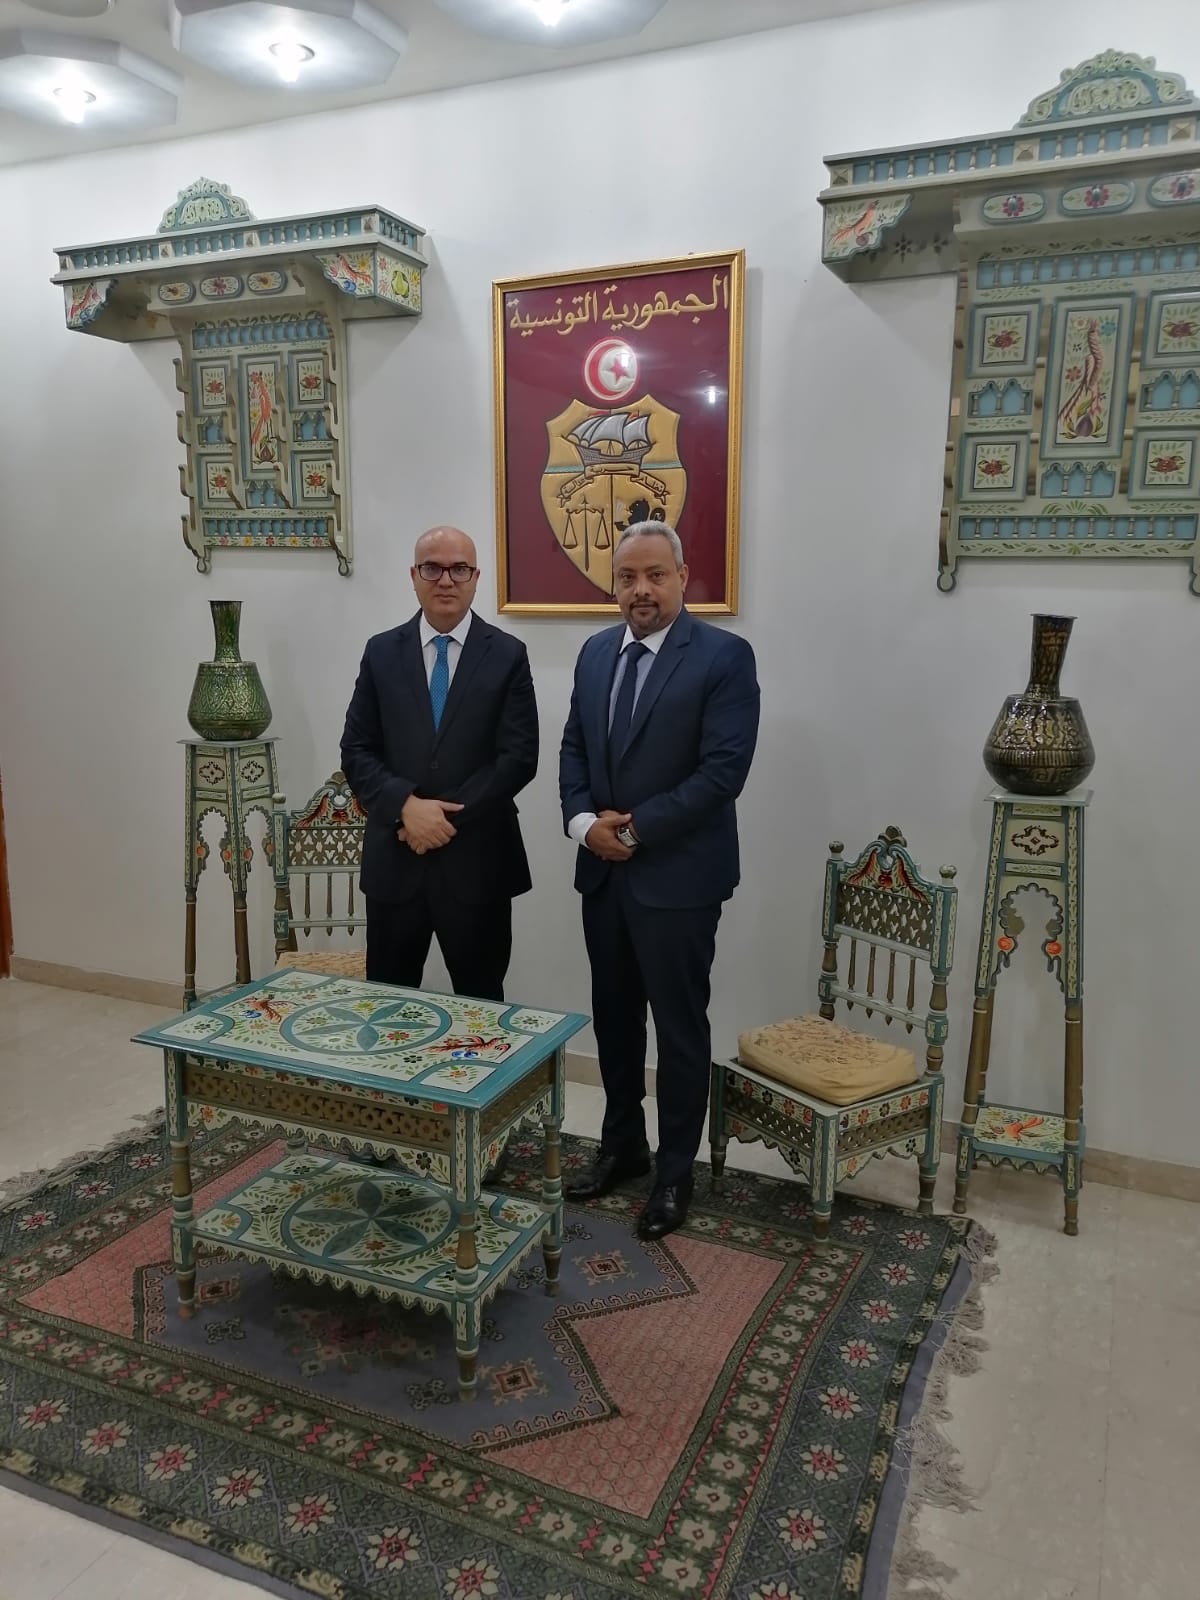 Visit of His Excellency to the Embassy of the Republic of Tunisia